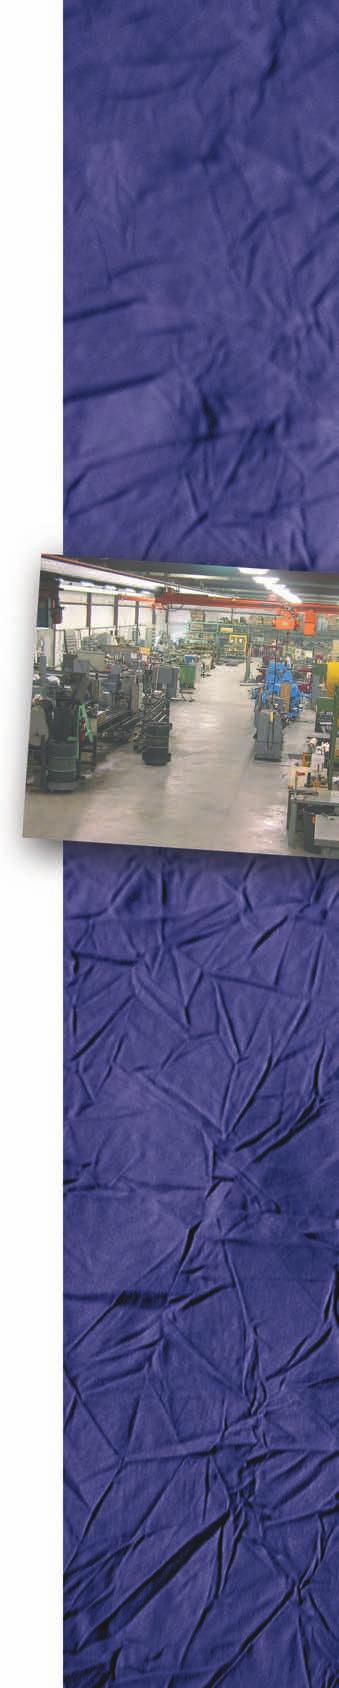 Our Advantage OUR MISSION We are committed to providing the plastic industry with quality products at the lowest prices and to extend personal, expedient customer service.